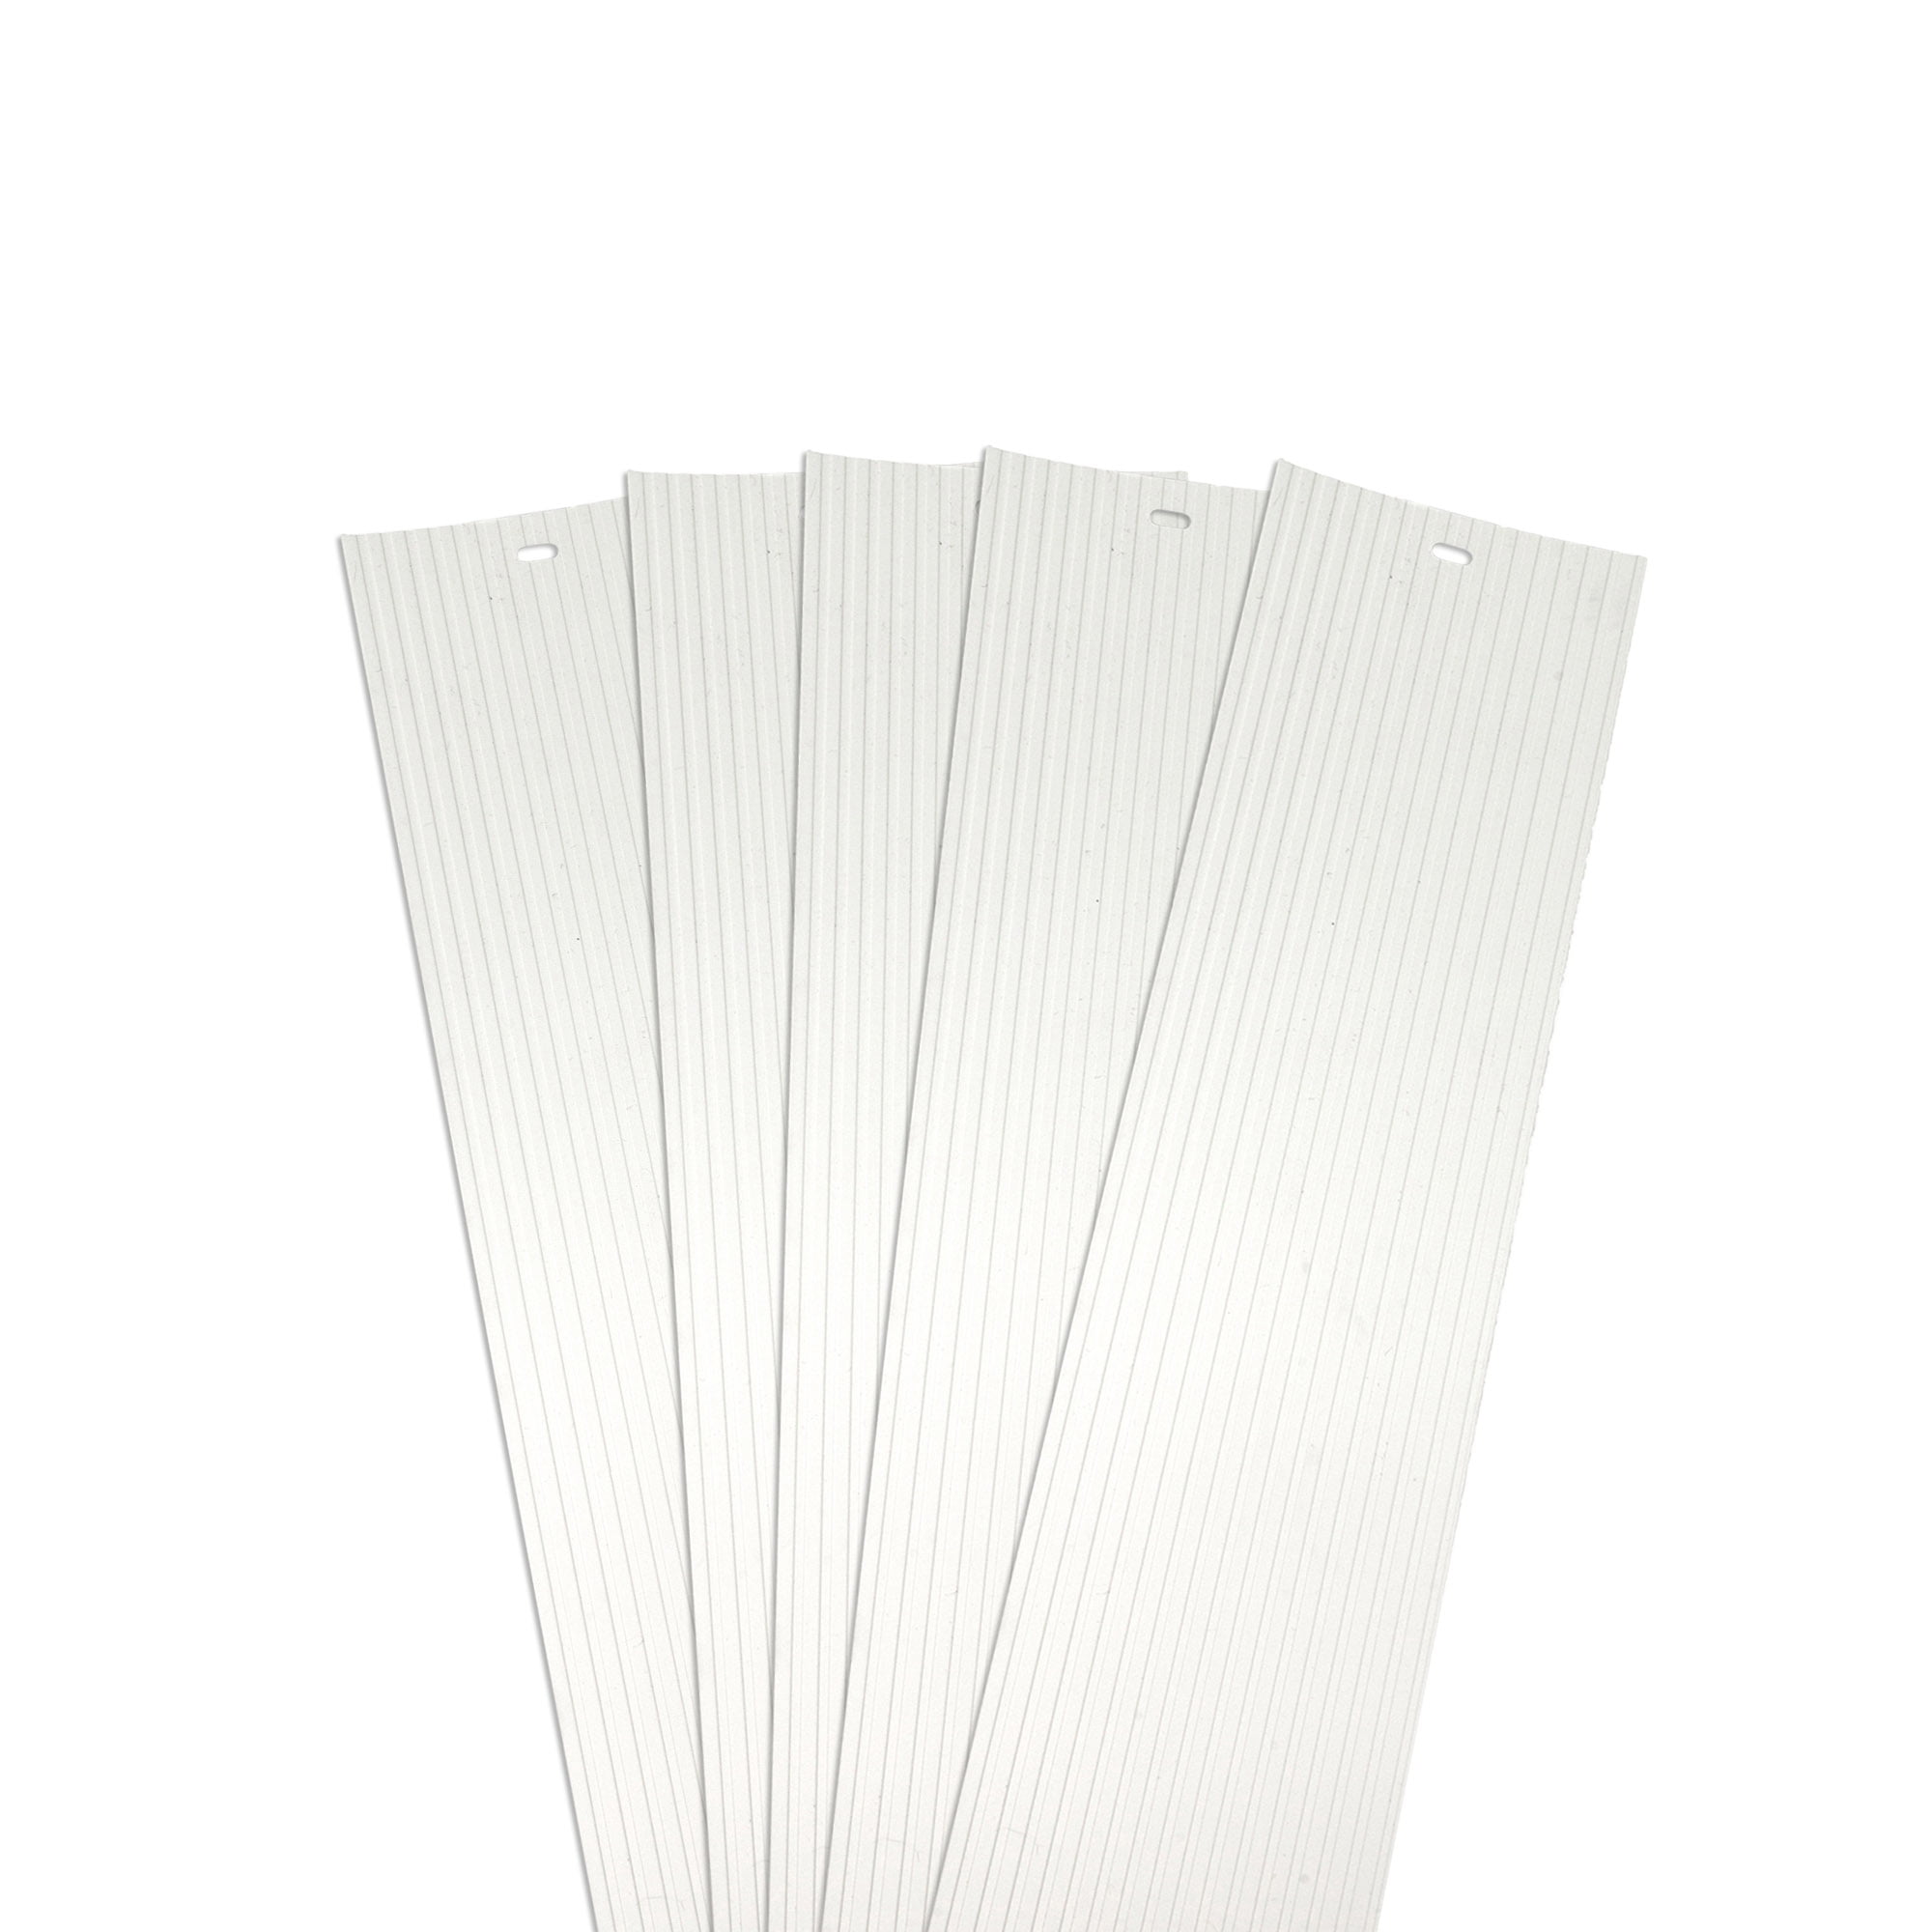 DALIX Ribbed Replacement Window Blinds Vertical Slats Off White 5 Pack Qty 